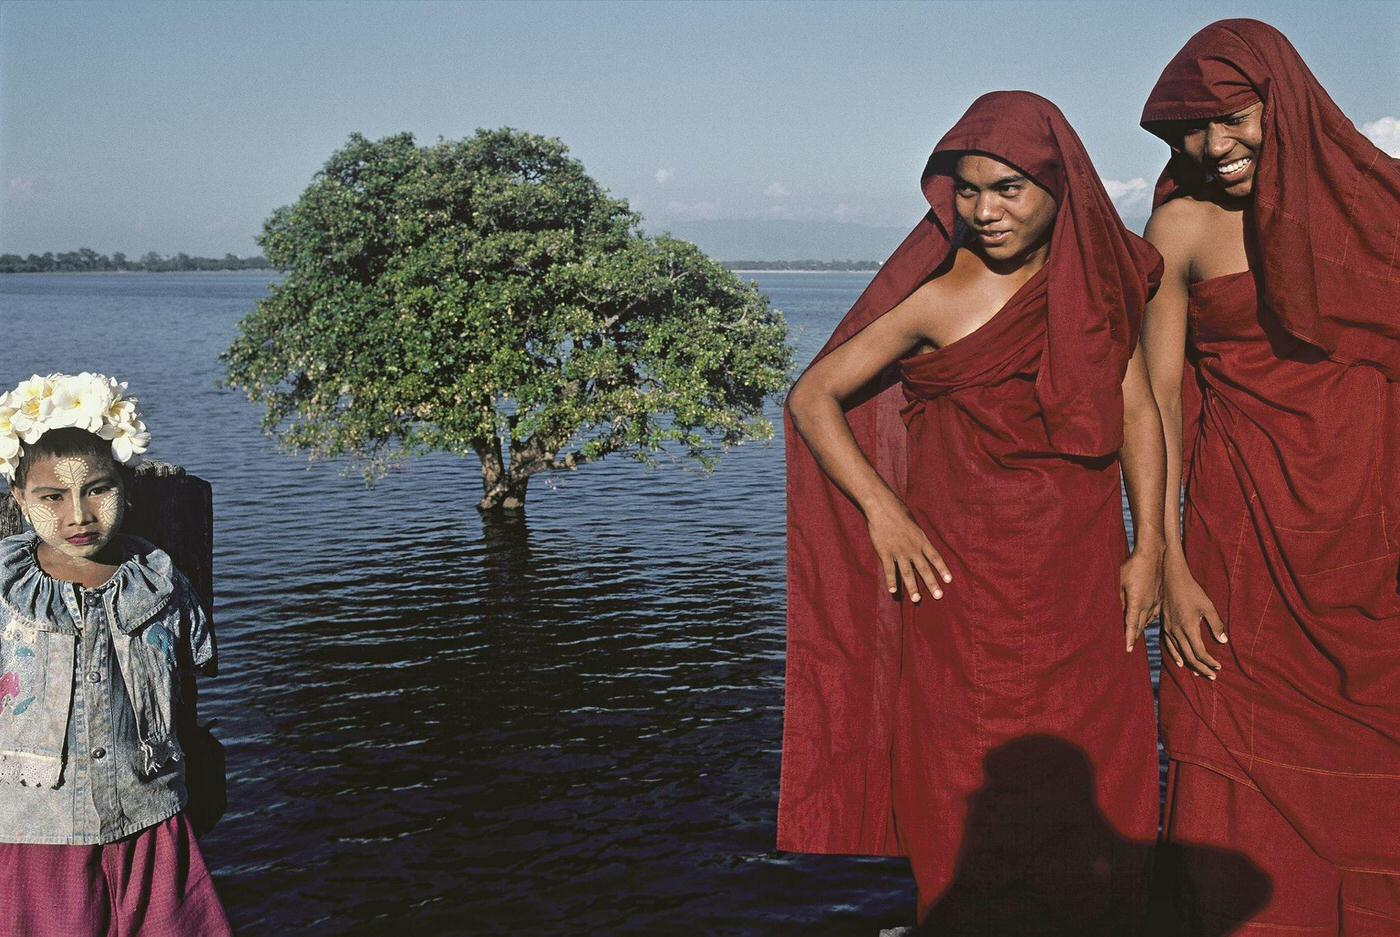 Monks in Bagan, Myanmar - Two Monks and a Little Girl on U Bein's Bridge, 1980s